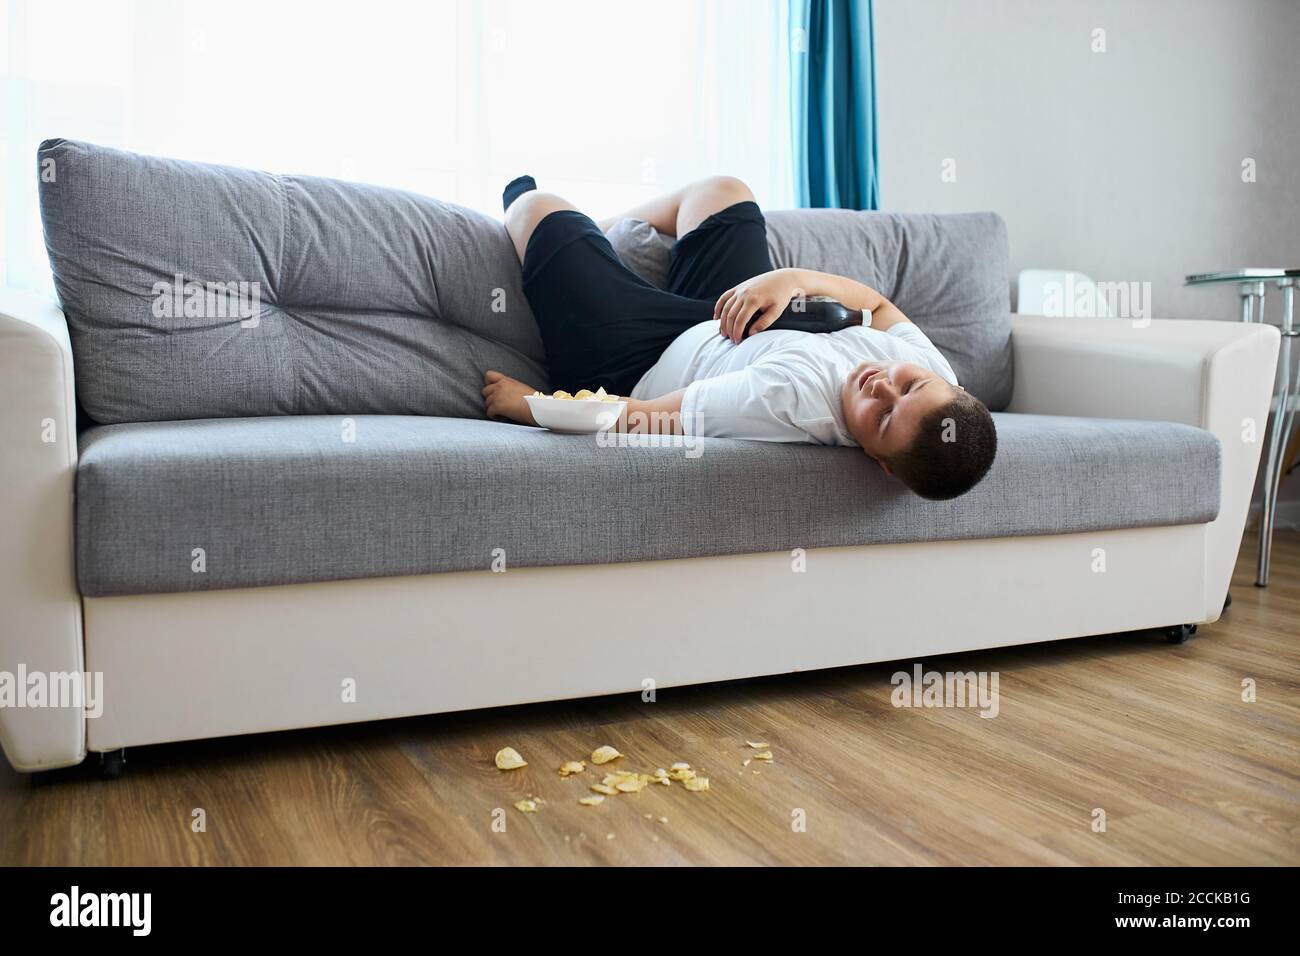 overeat fat boy sleep on sofa in living room, young caucasian teen boy fall asleep while he was watching tv and eating crisps Stock Photo